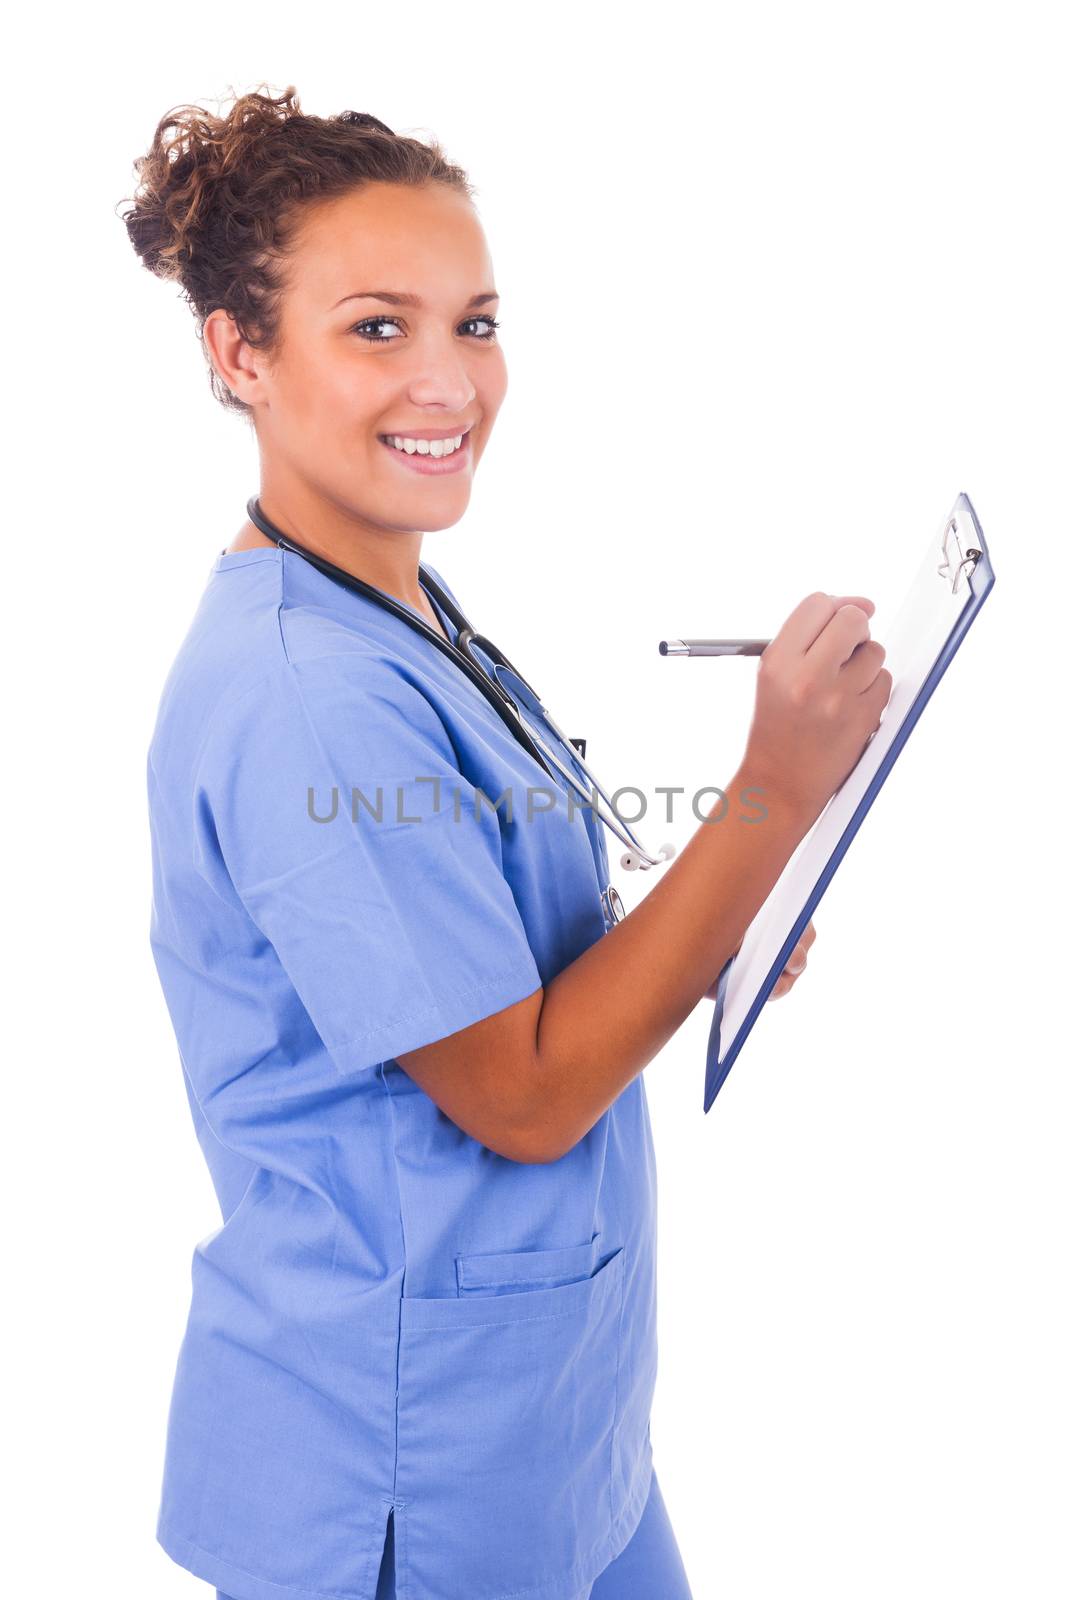 Young nurse with stethoscope isolated on white background